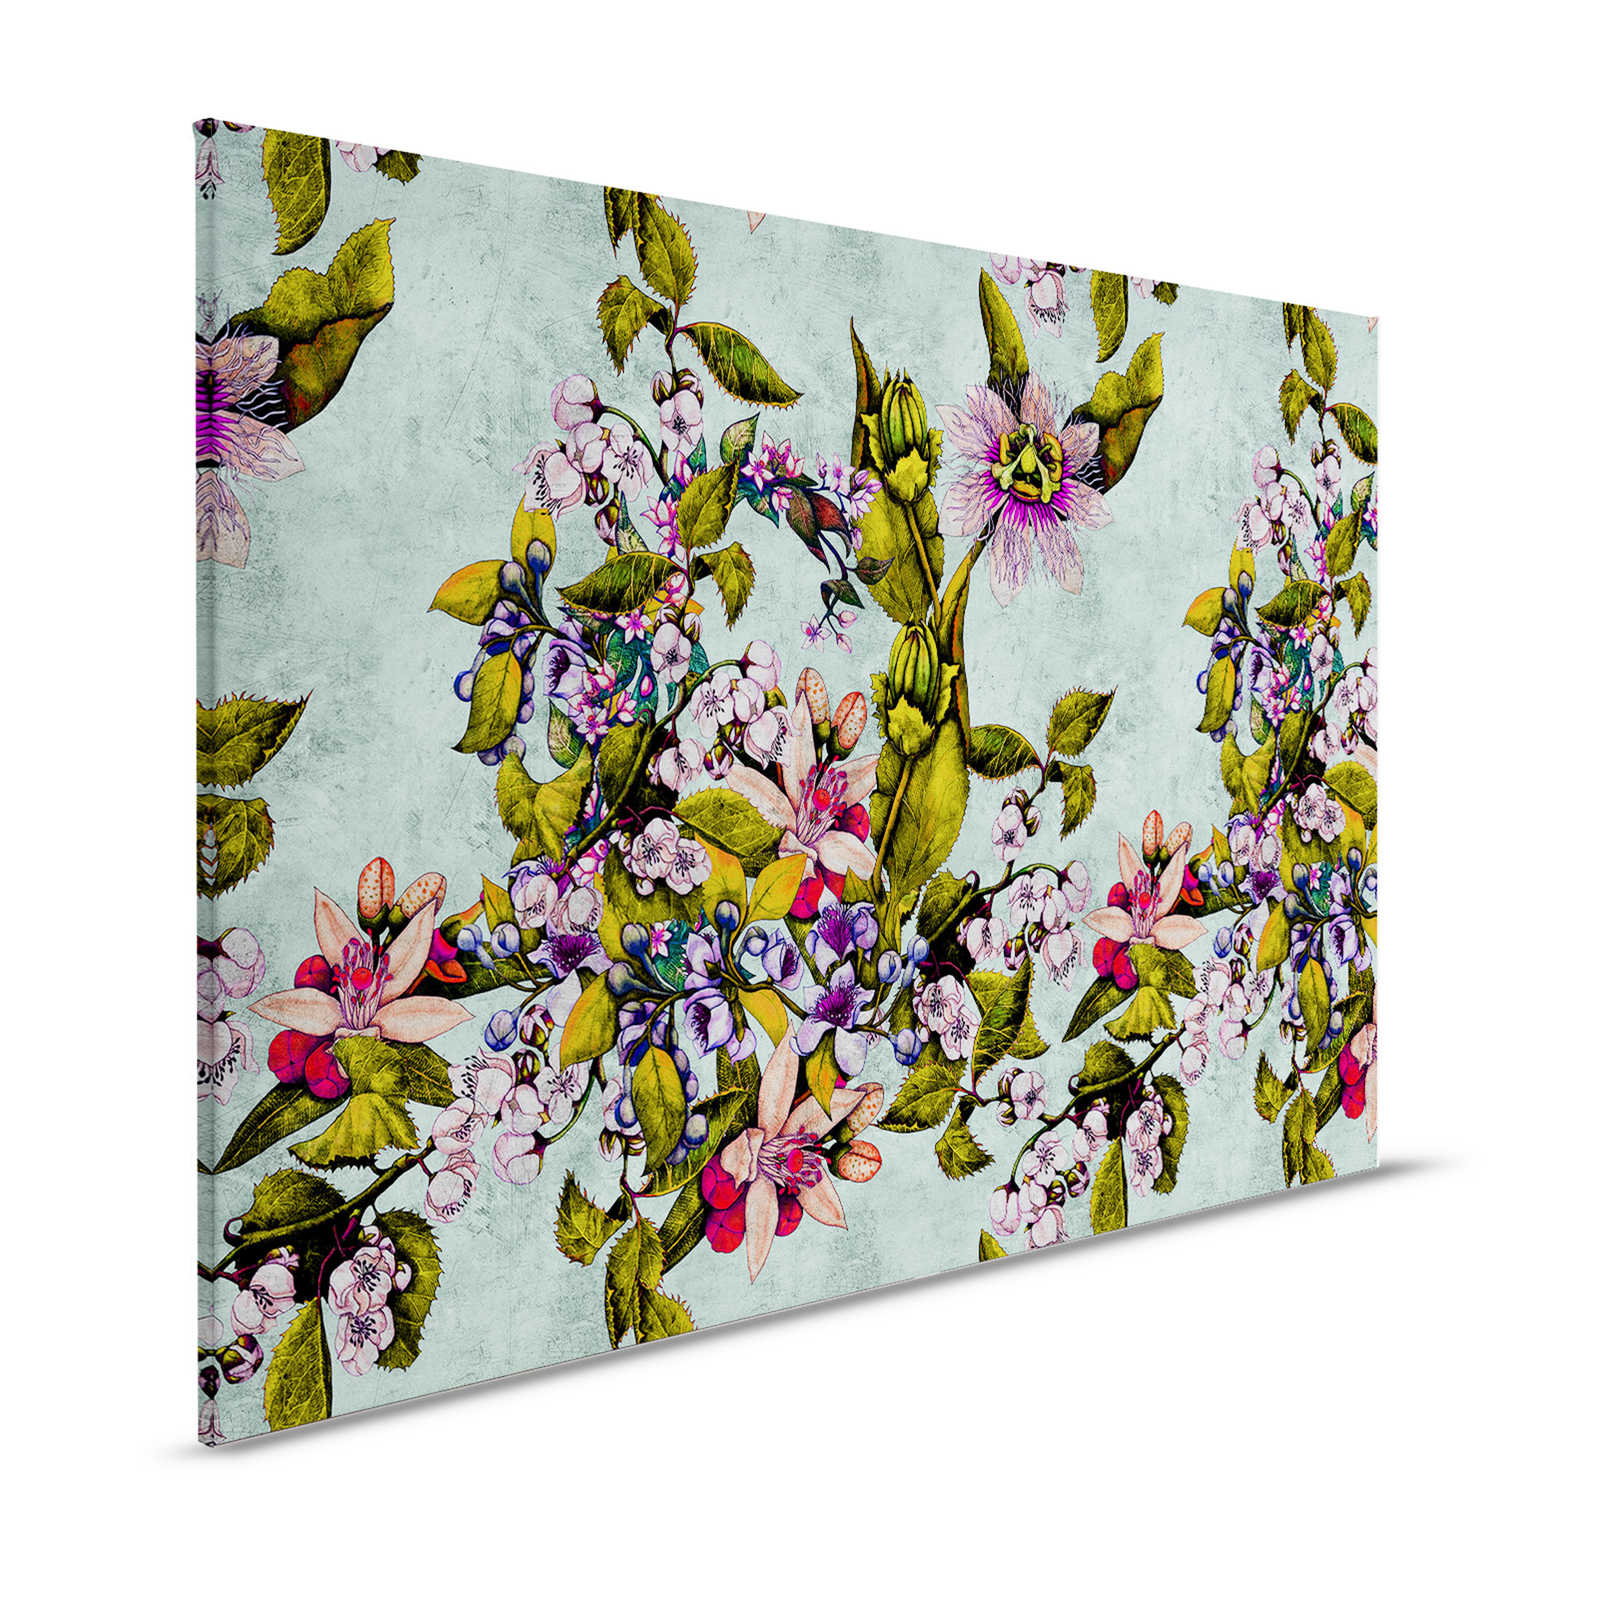 Tropical Passion 2 - Canvas painting with flowers and buds - 1.20 m x 0.80 m
